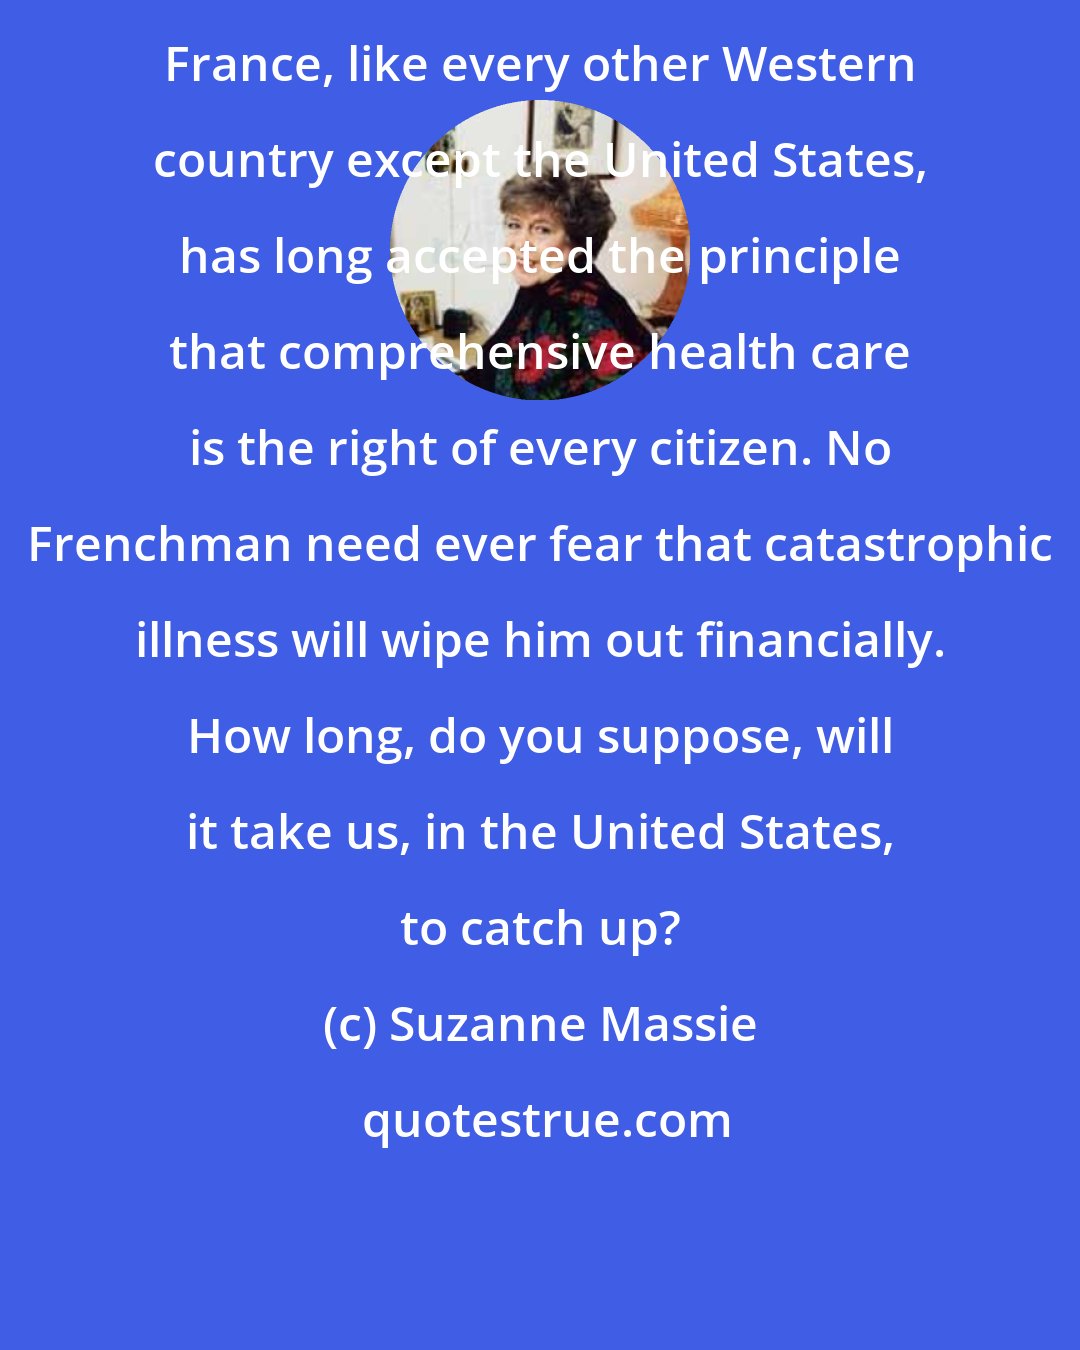 Suzanne Massie: France, like every other Western country except the United States, has long accepted the principle that comprehensive health care is the right of every citizen. No Frenchman need ever fear that catastrophic illness will wipe him out financially. How long, do you suppose, will it take us, in the United States, to catch up?